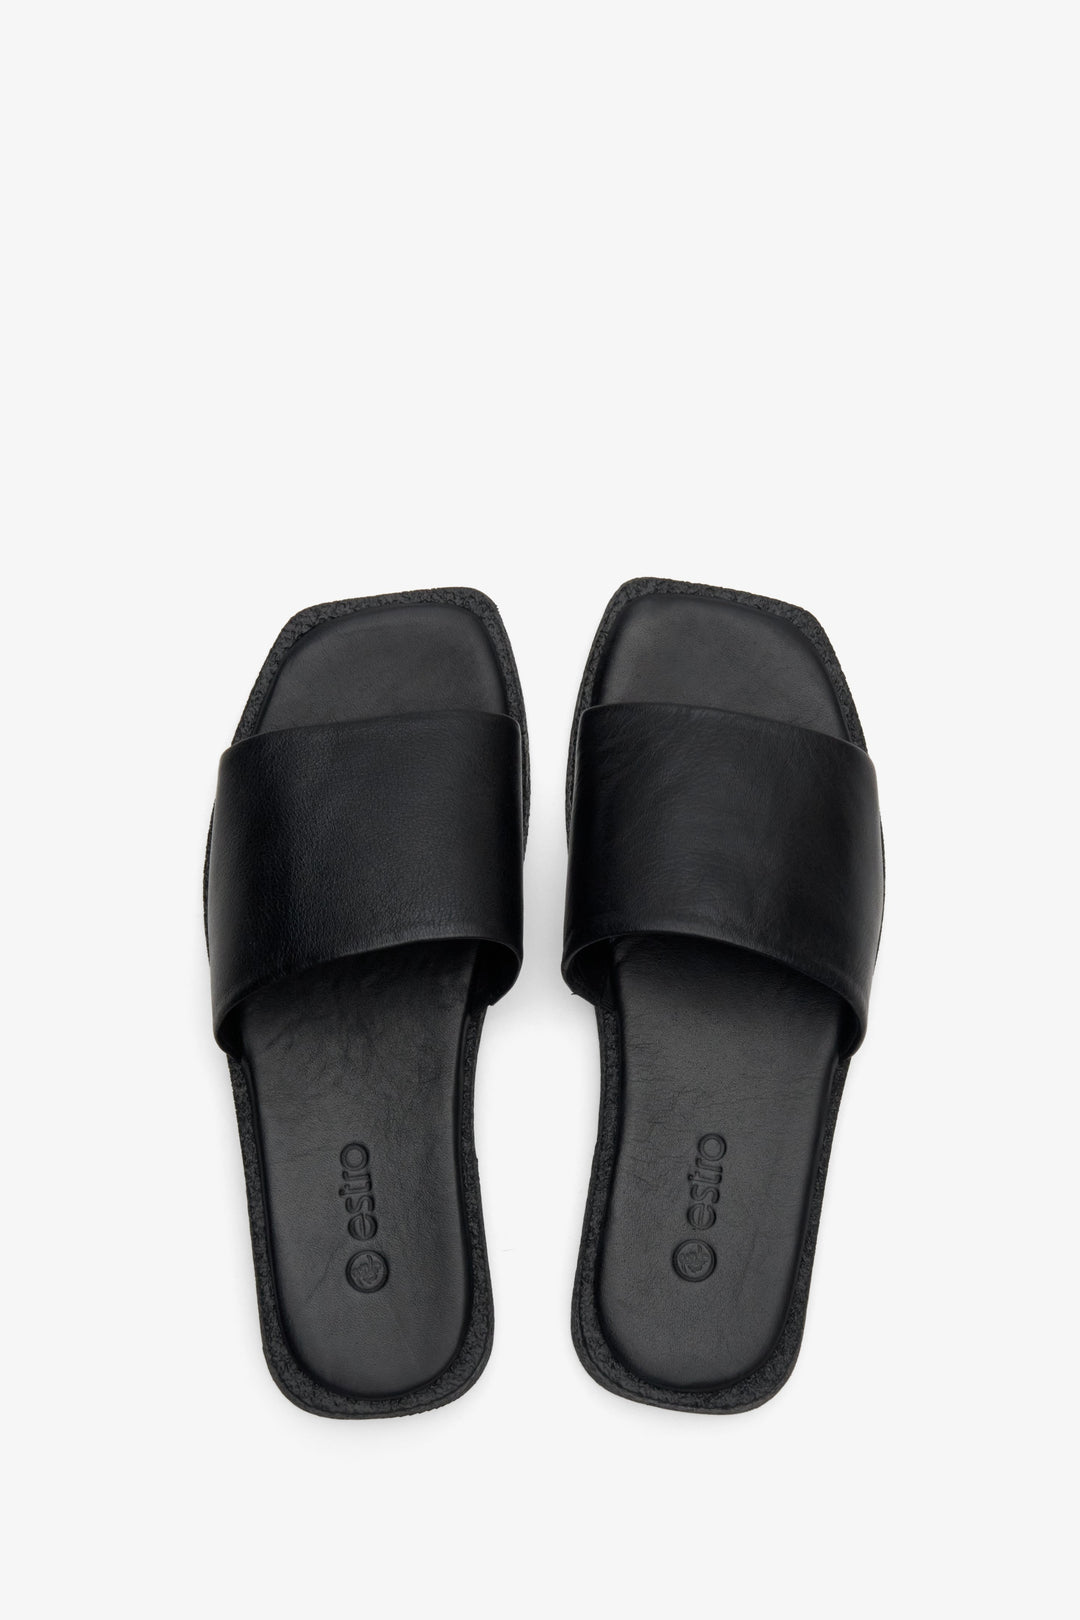 Leather, black Estro women's flat sandals with a square toe - presentation of the model from above.